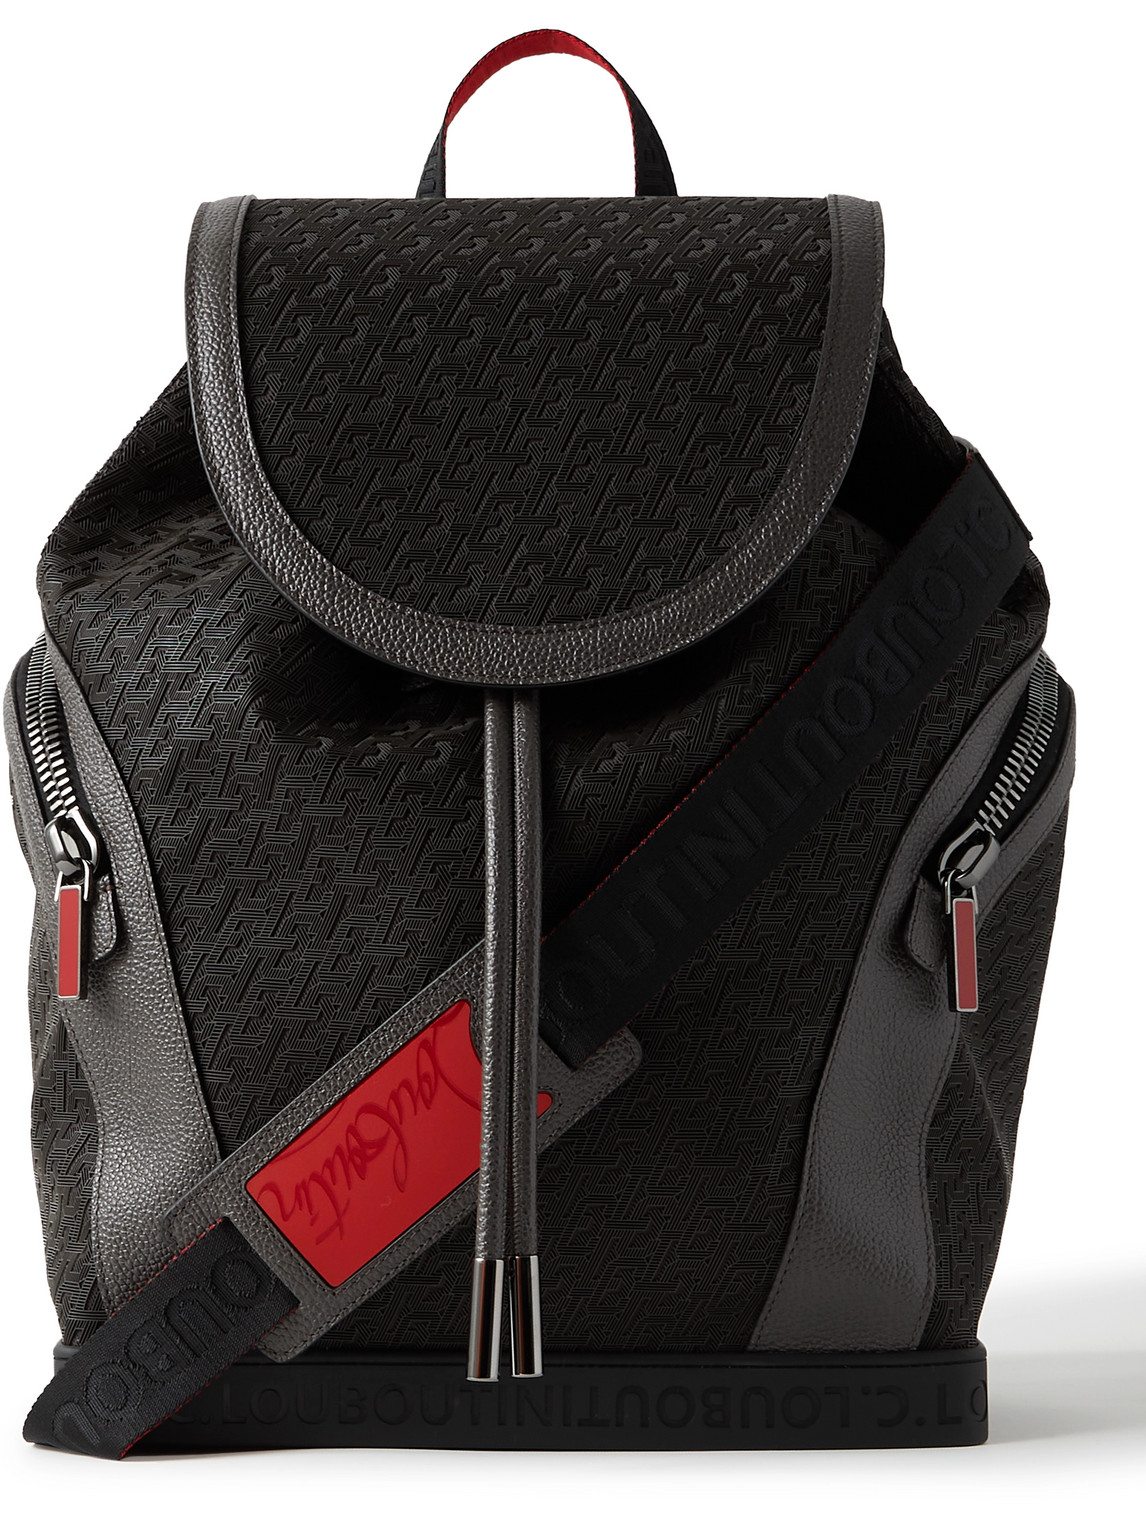 CHRISTIAN LOUBOUTIN EXPLORAFUNK LEATHER-TRIMMED LOGO-JACQUARD COATED-CANVAS BACKPACK